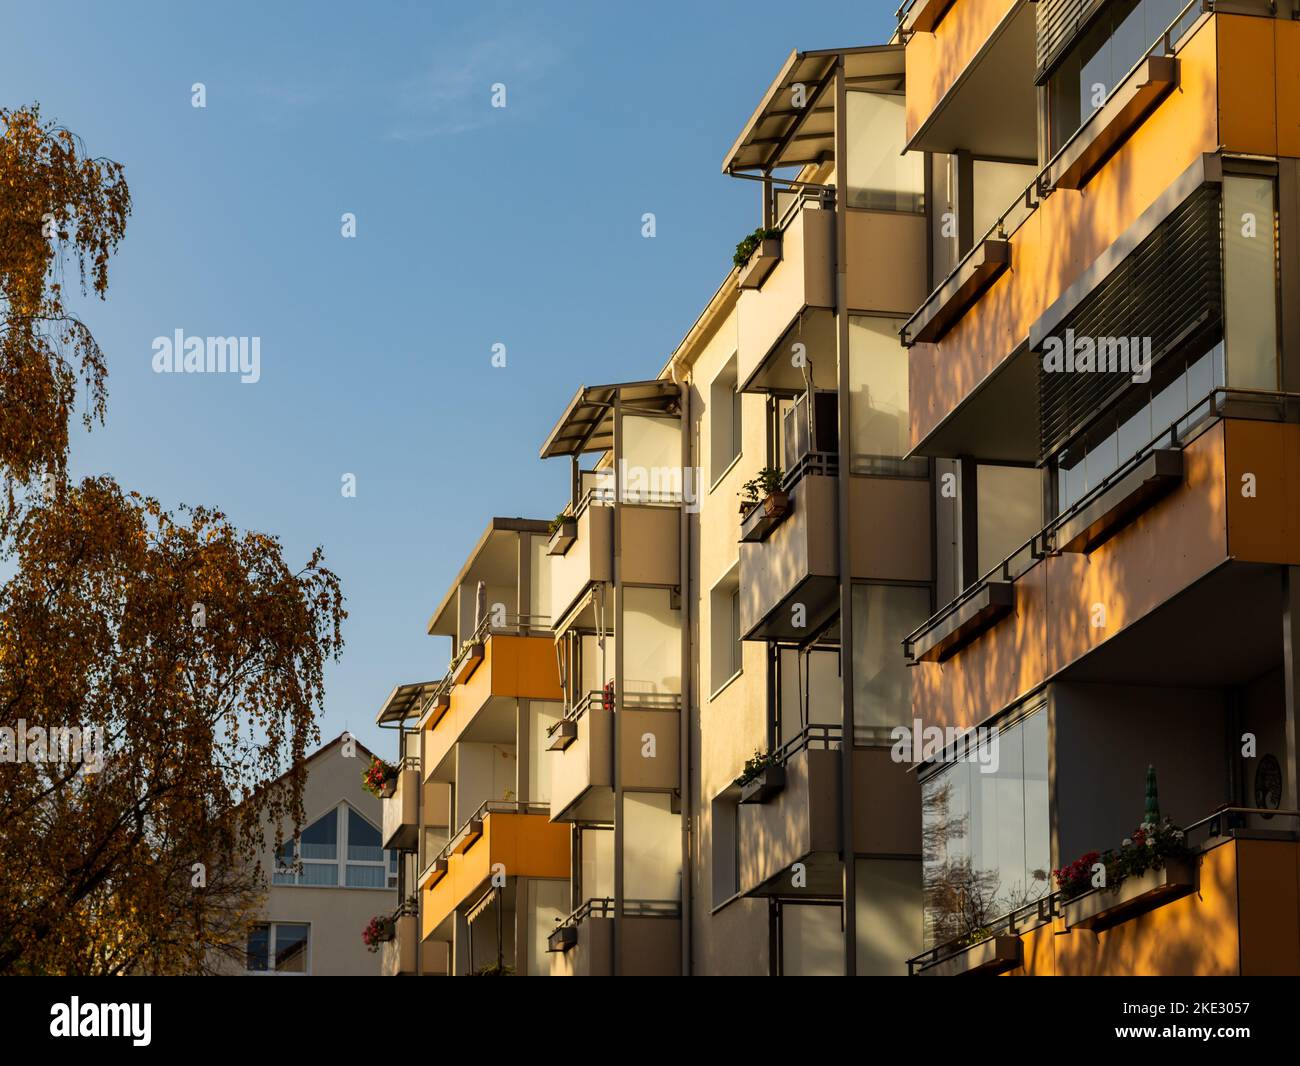 Balconies of a residential building in natural colors. Beautiful facade in the autumn season. Architecture of an apartment building. Stock Photo